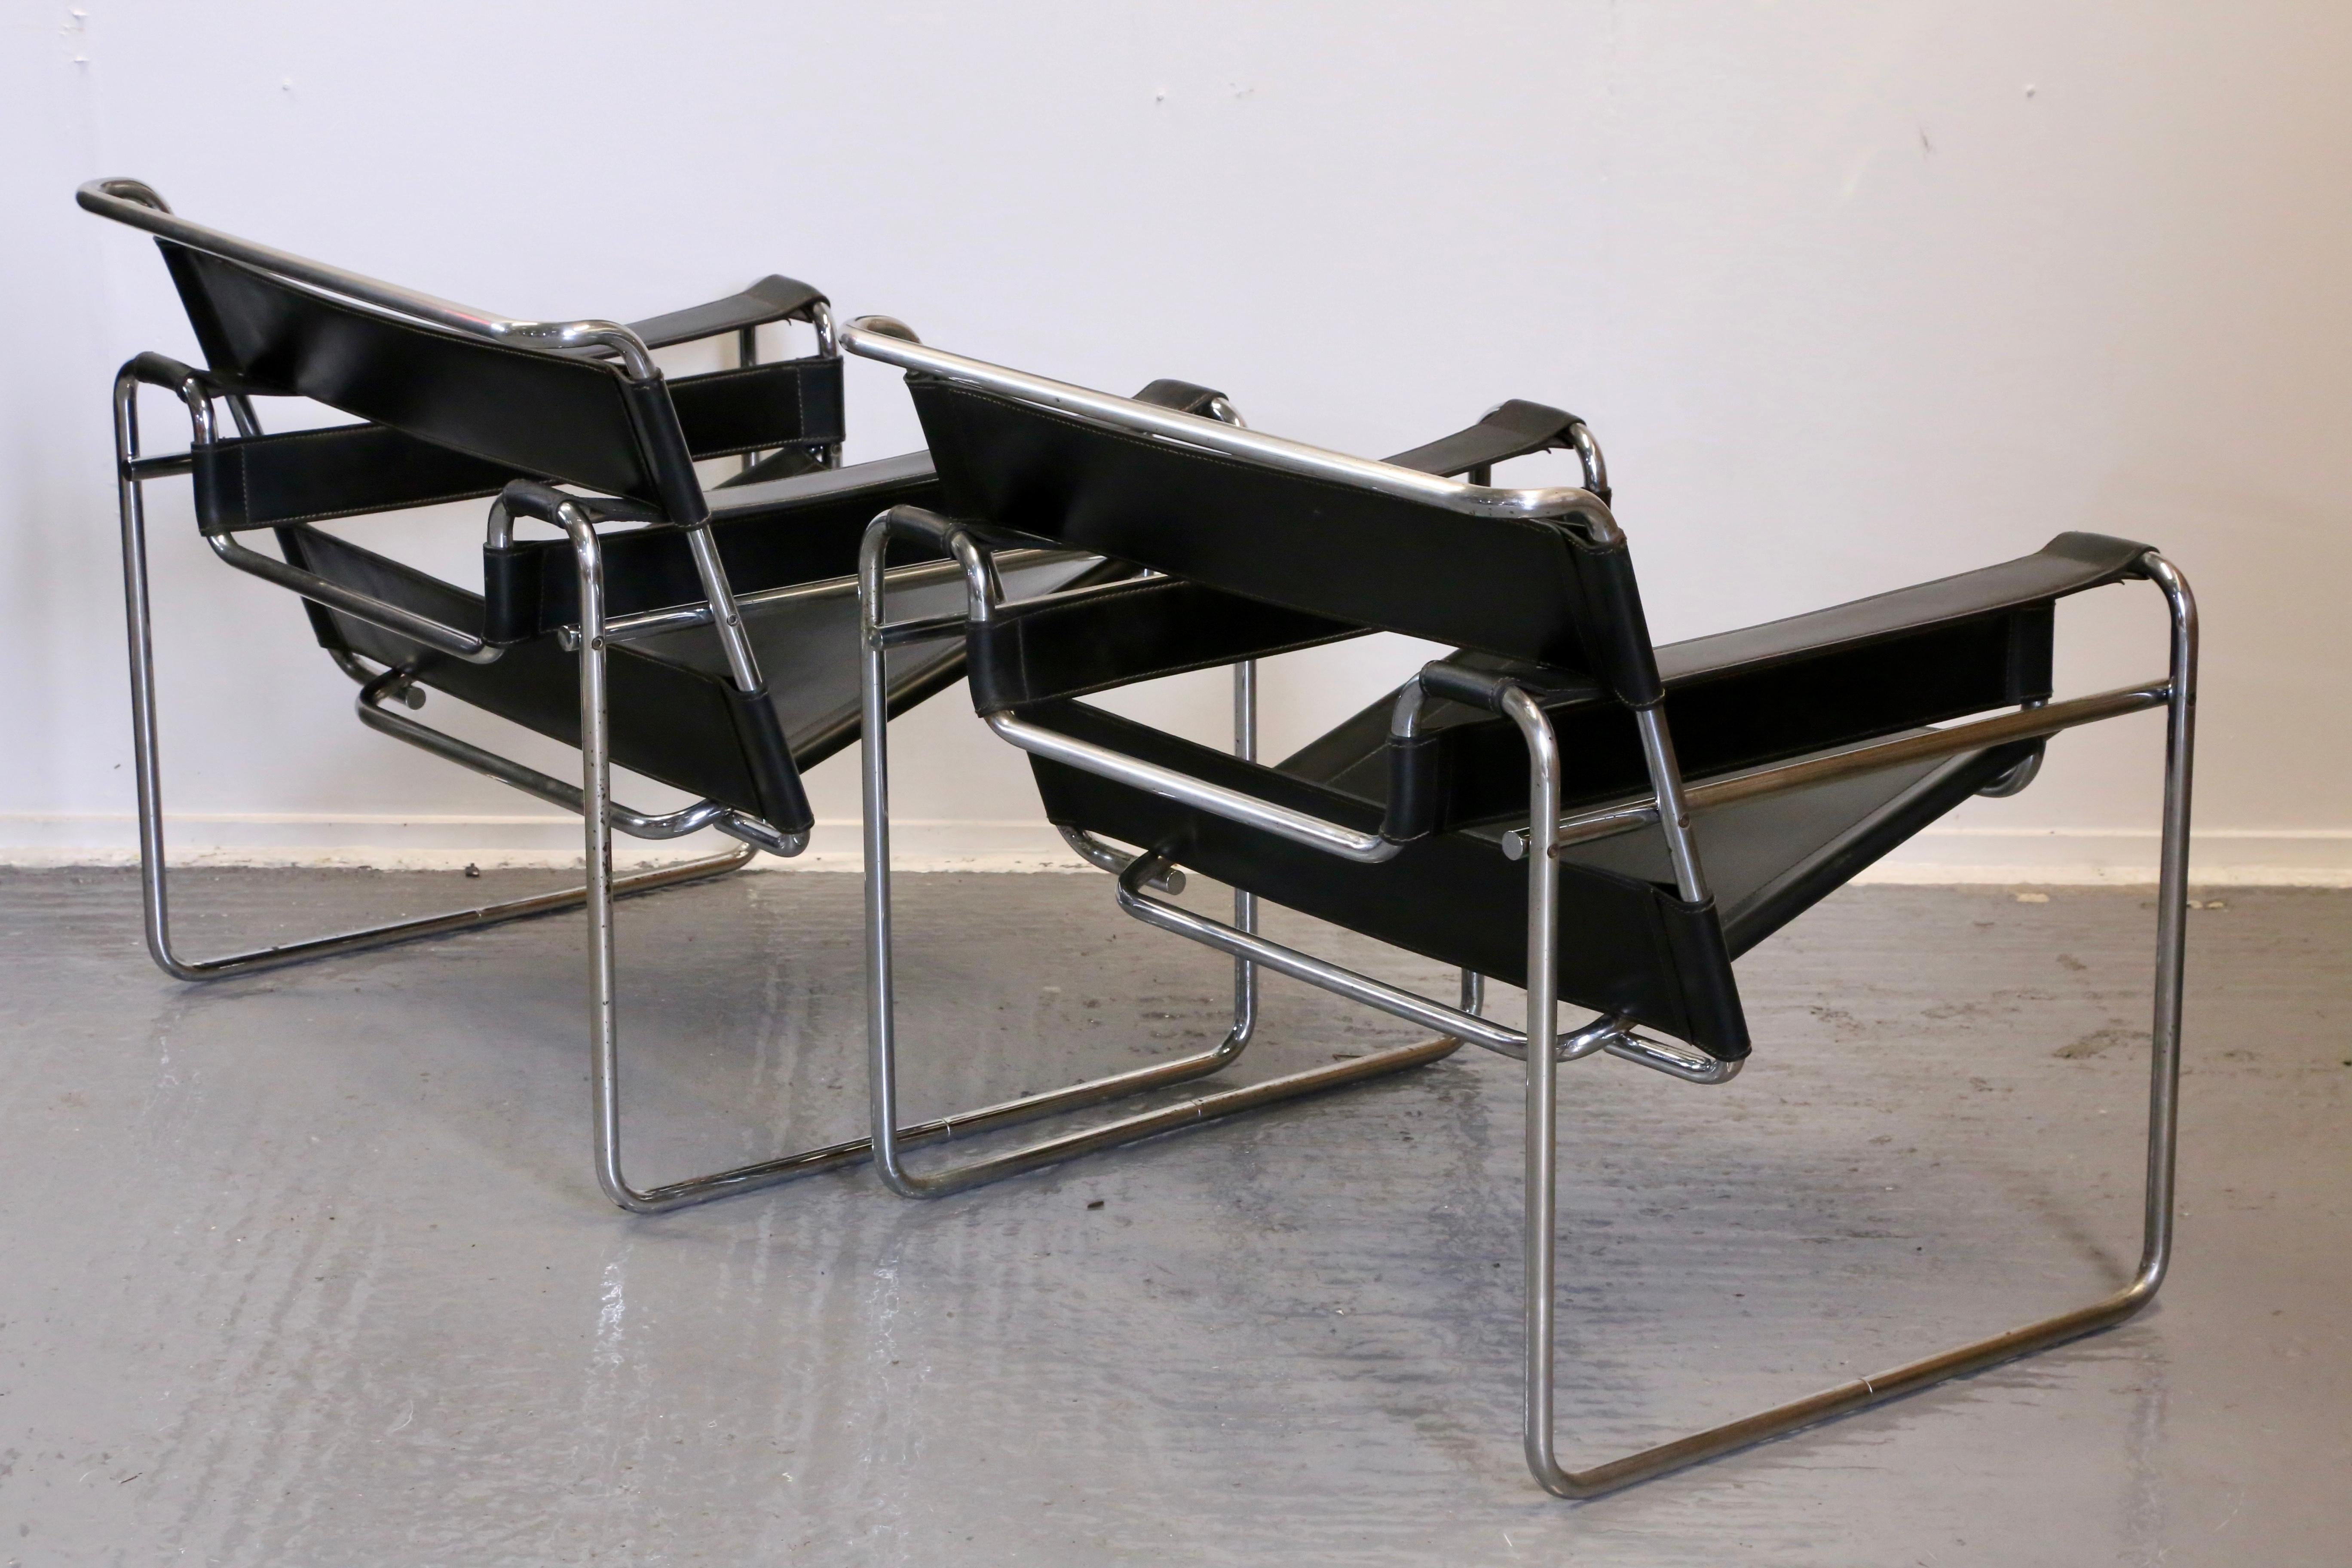 A remarkable pair of lounge armchairs, originally designed mid 1920s by Marcel Breuer as the Model B3 Wassily chair. These chairs, showing slight wear to the chrome, with pitting and rust spots, feature precision weld ends, marked bolts with all